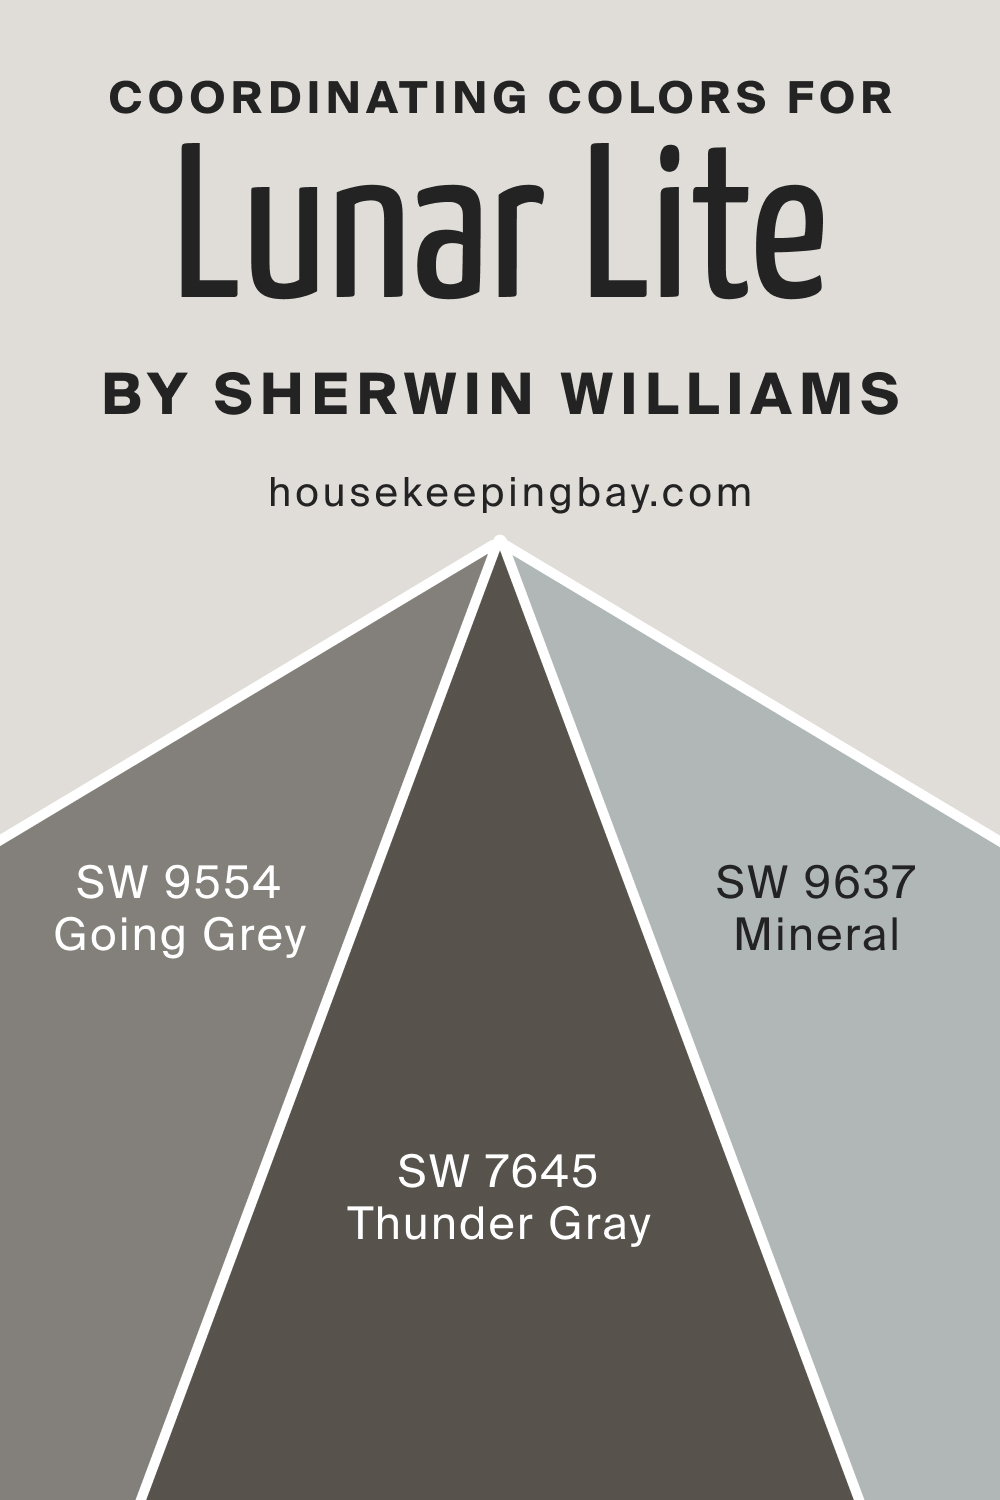 Coordinating Colors for SW 9546 Lunar Lite by Sherwin Williams